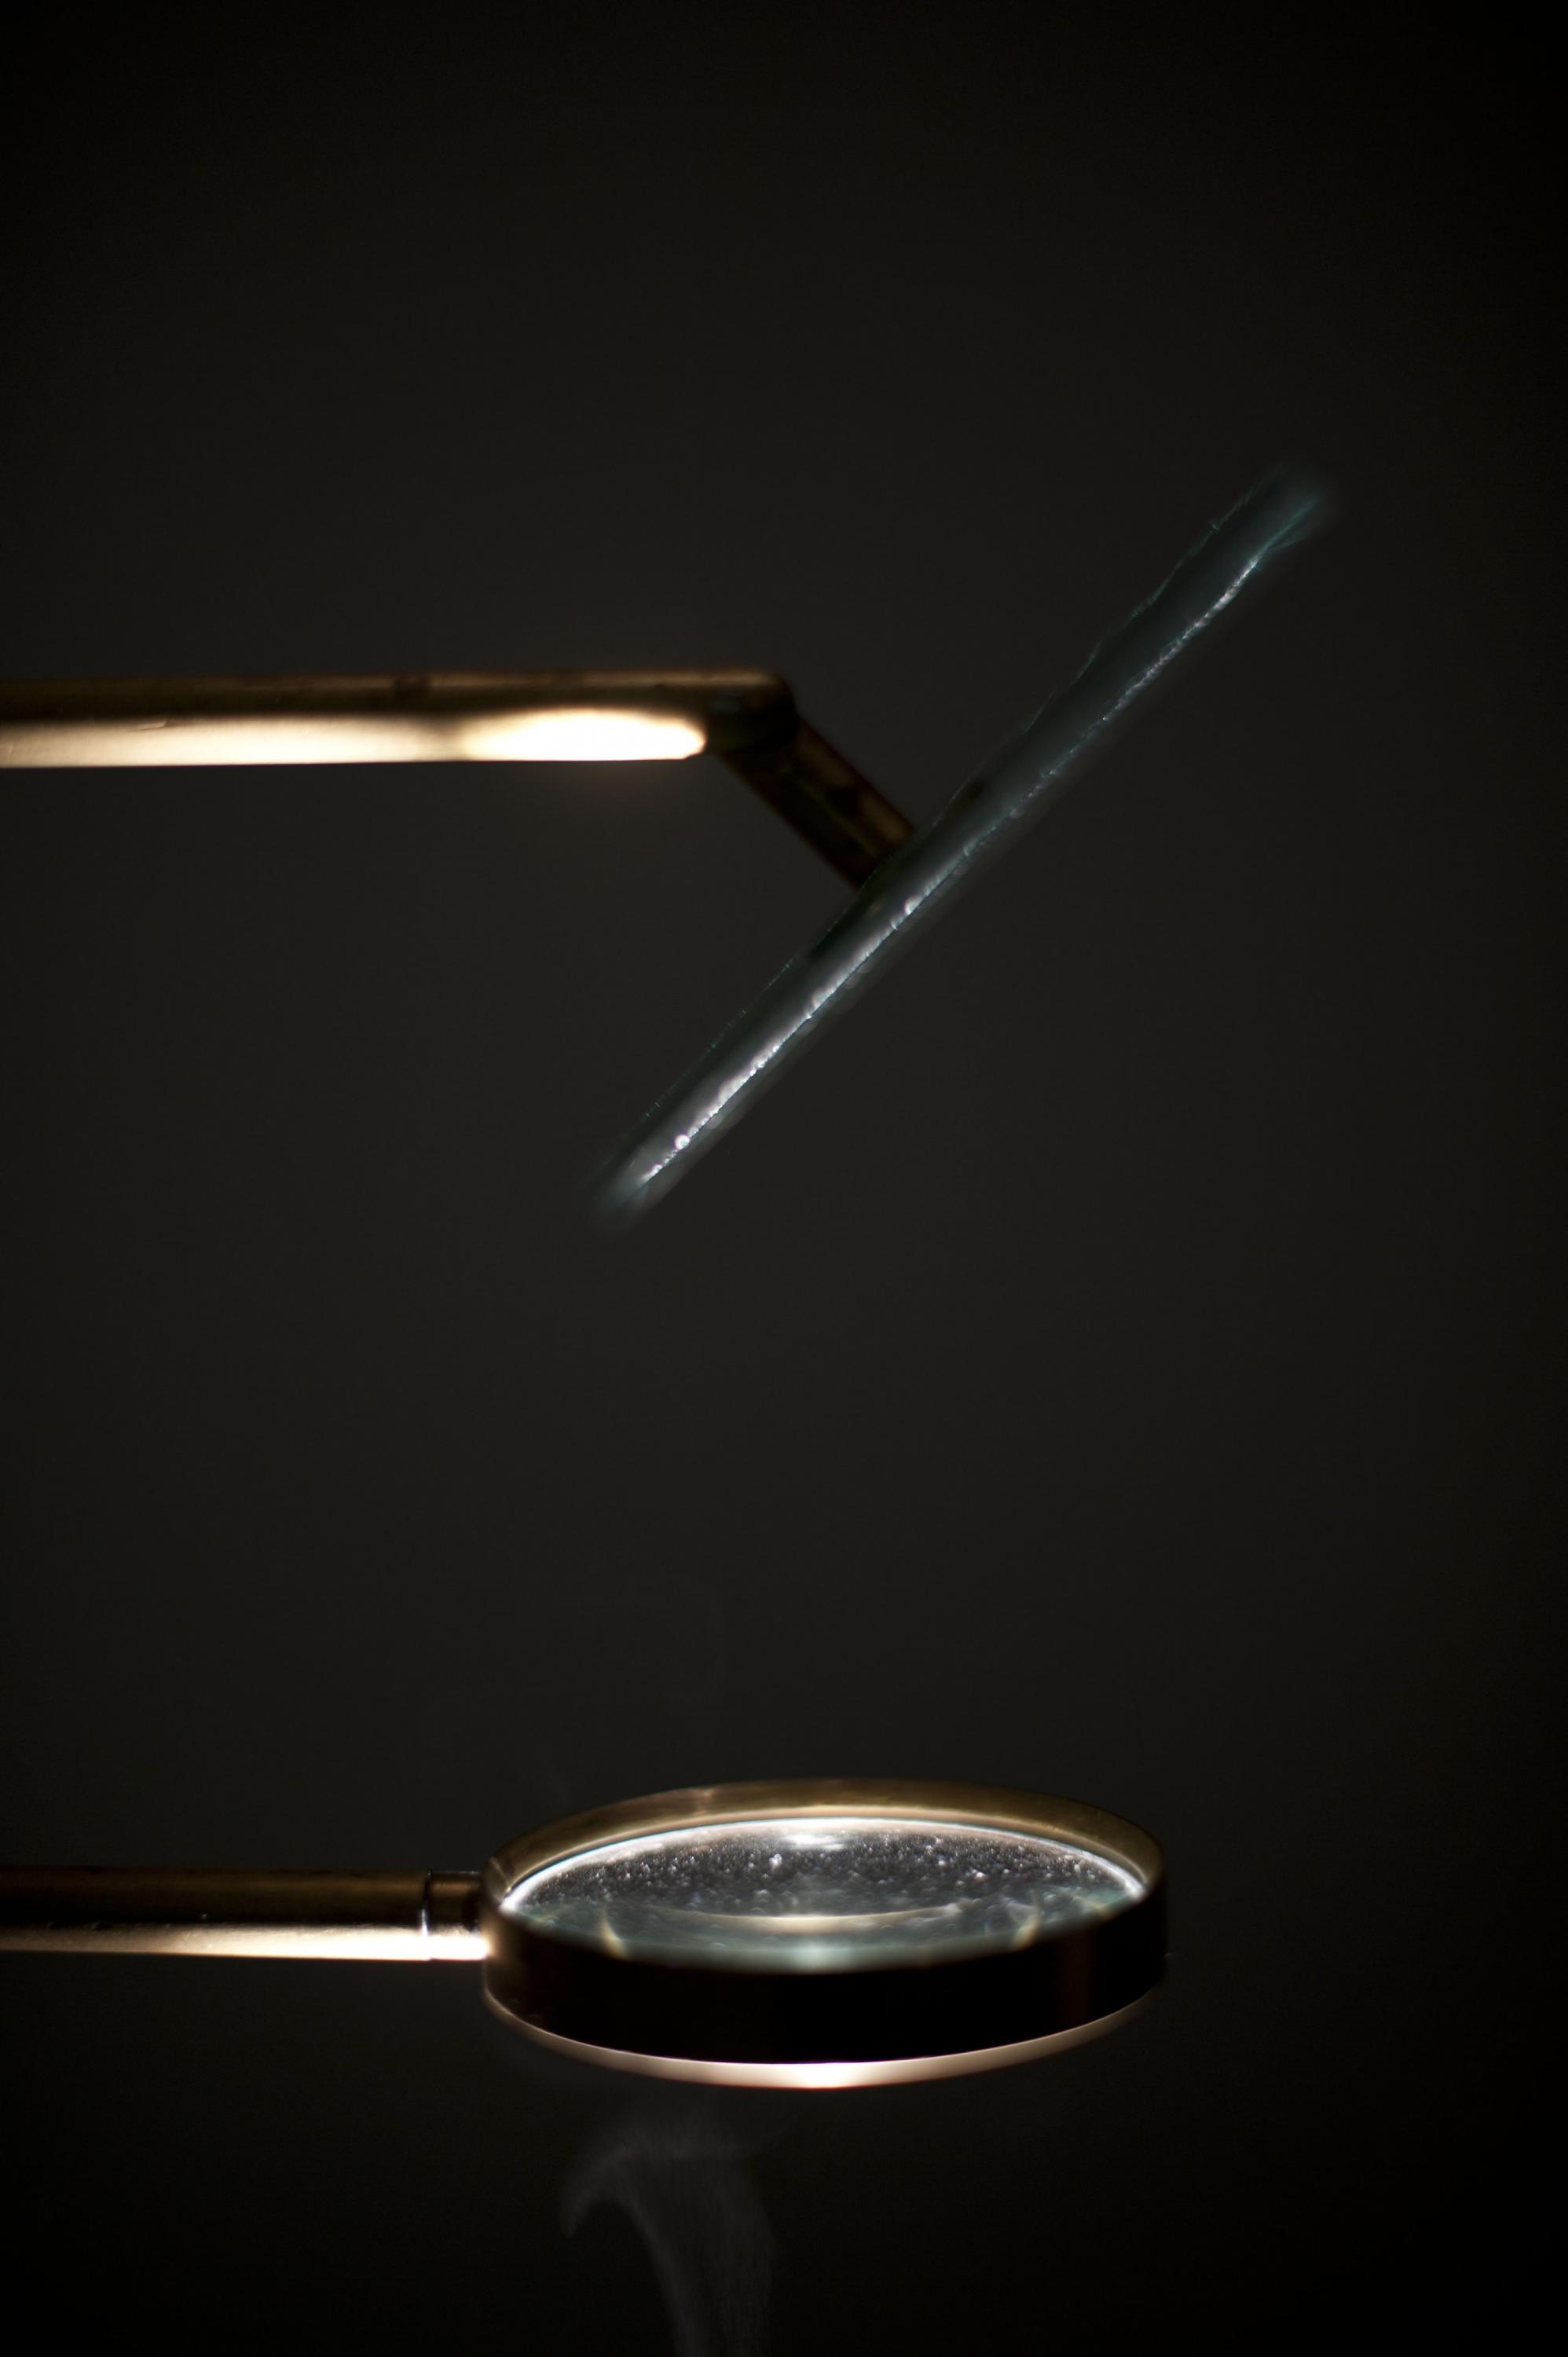 Francisco Tropa, Demonstration of diffraction using water waves, 1992-2010